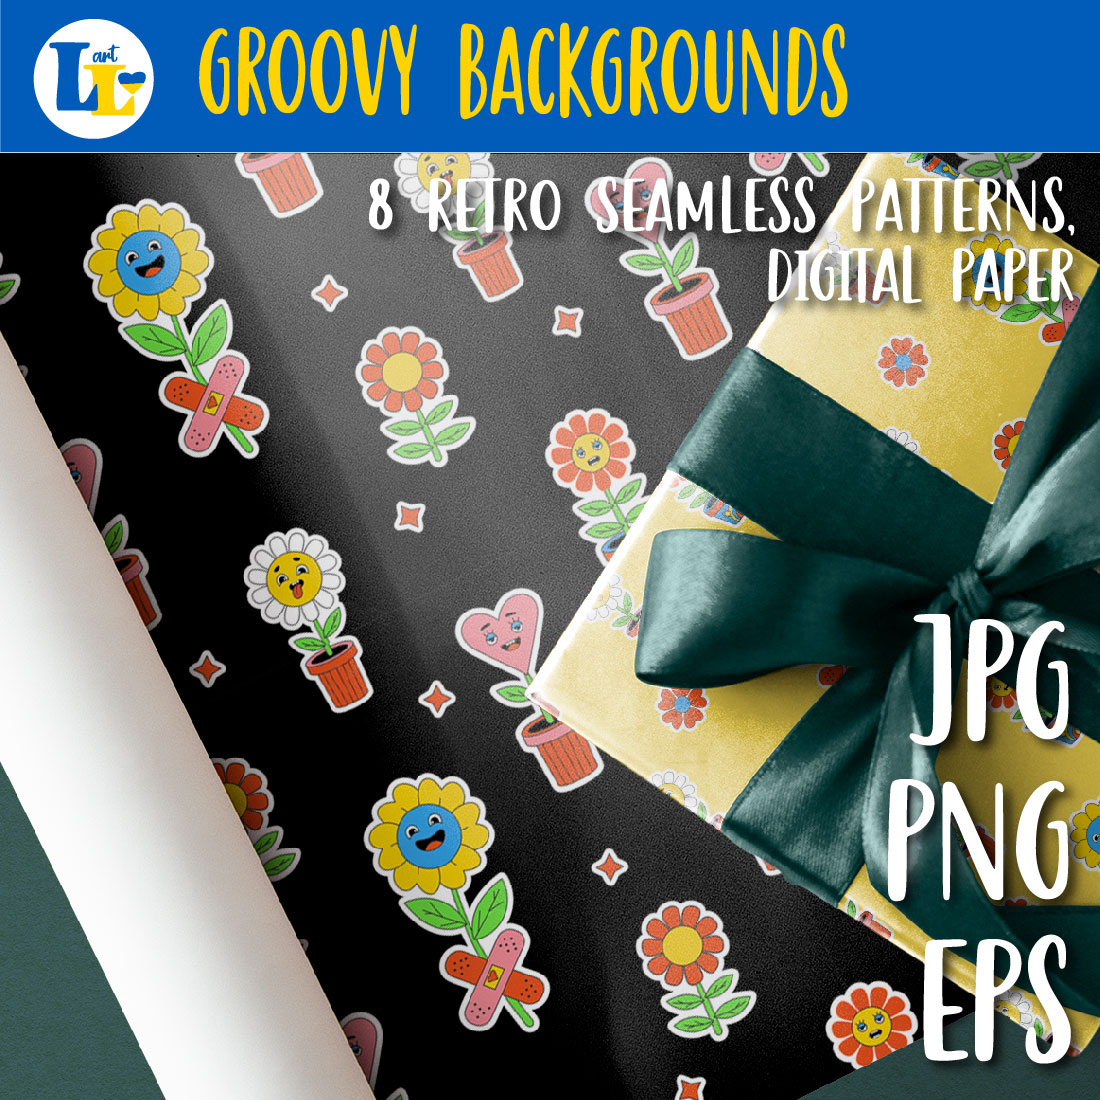 retro patern Retro Seamless Patterns, Groovy Backgrounds.